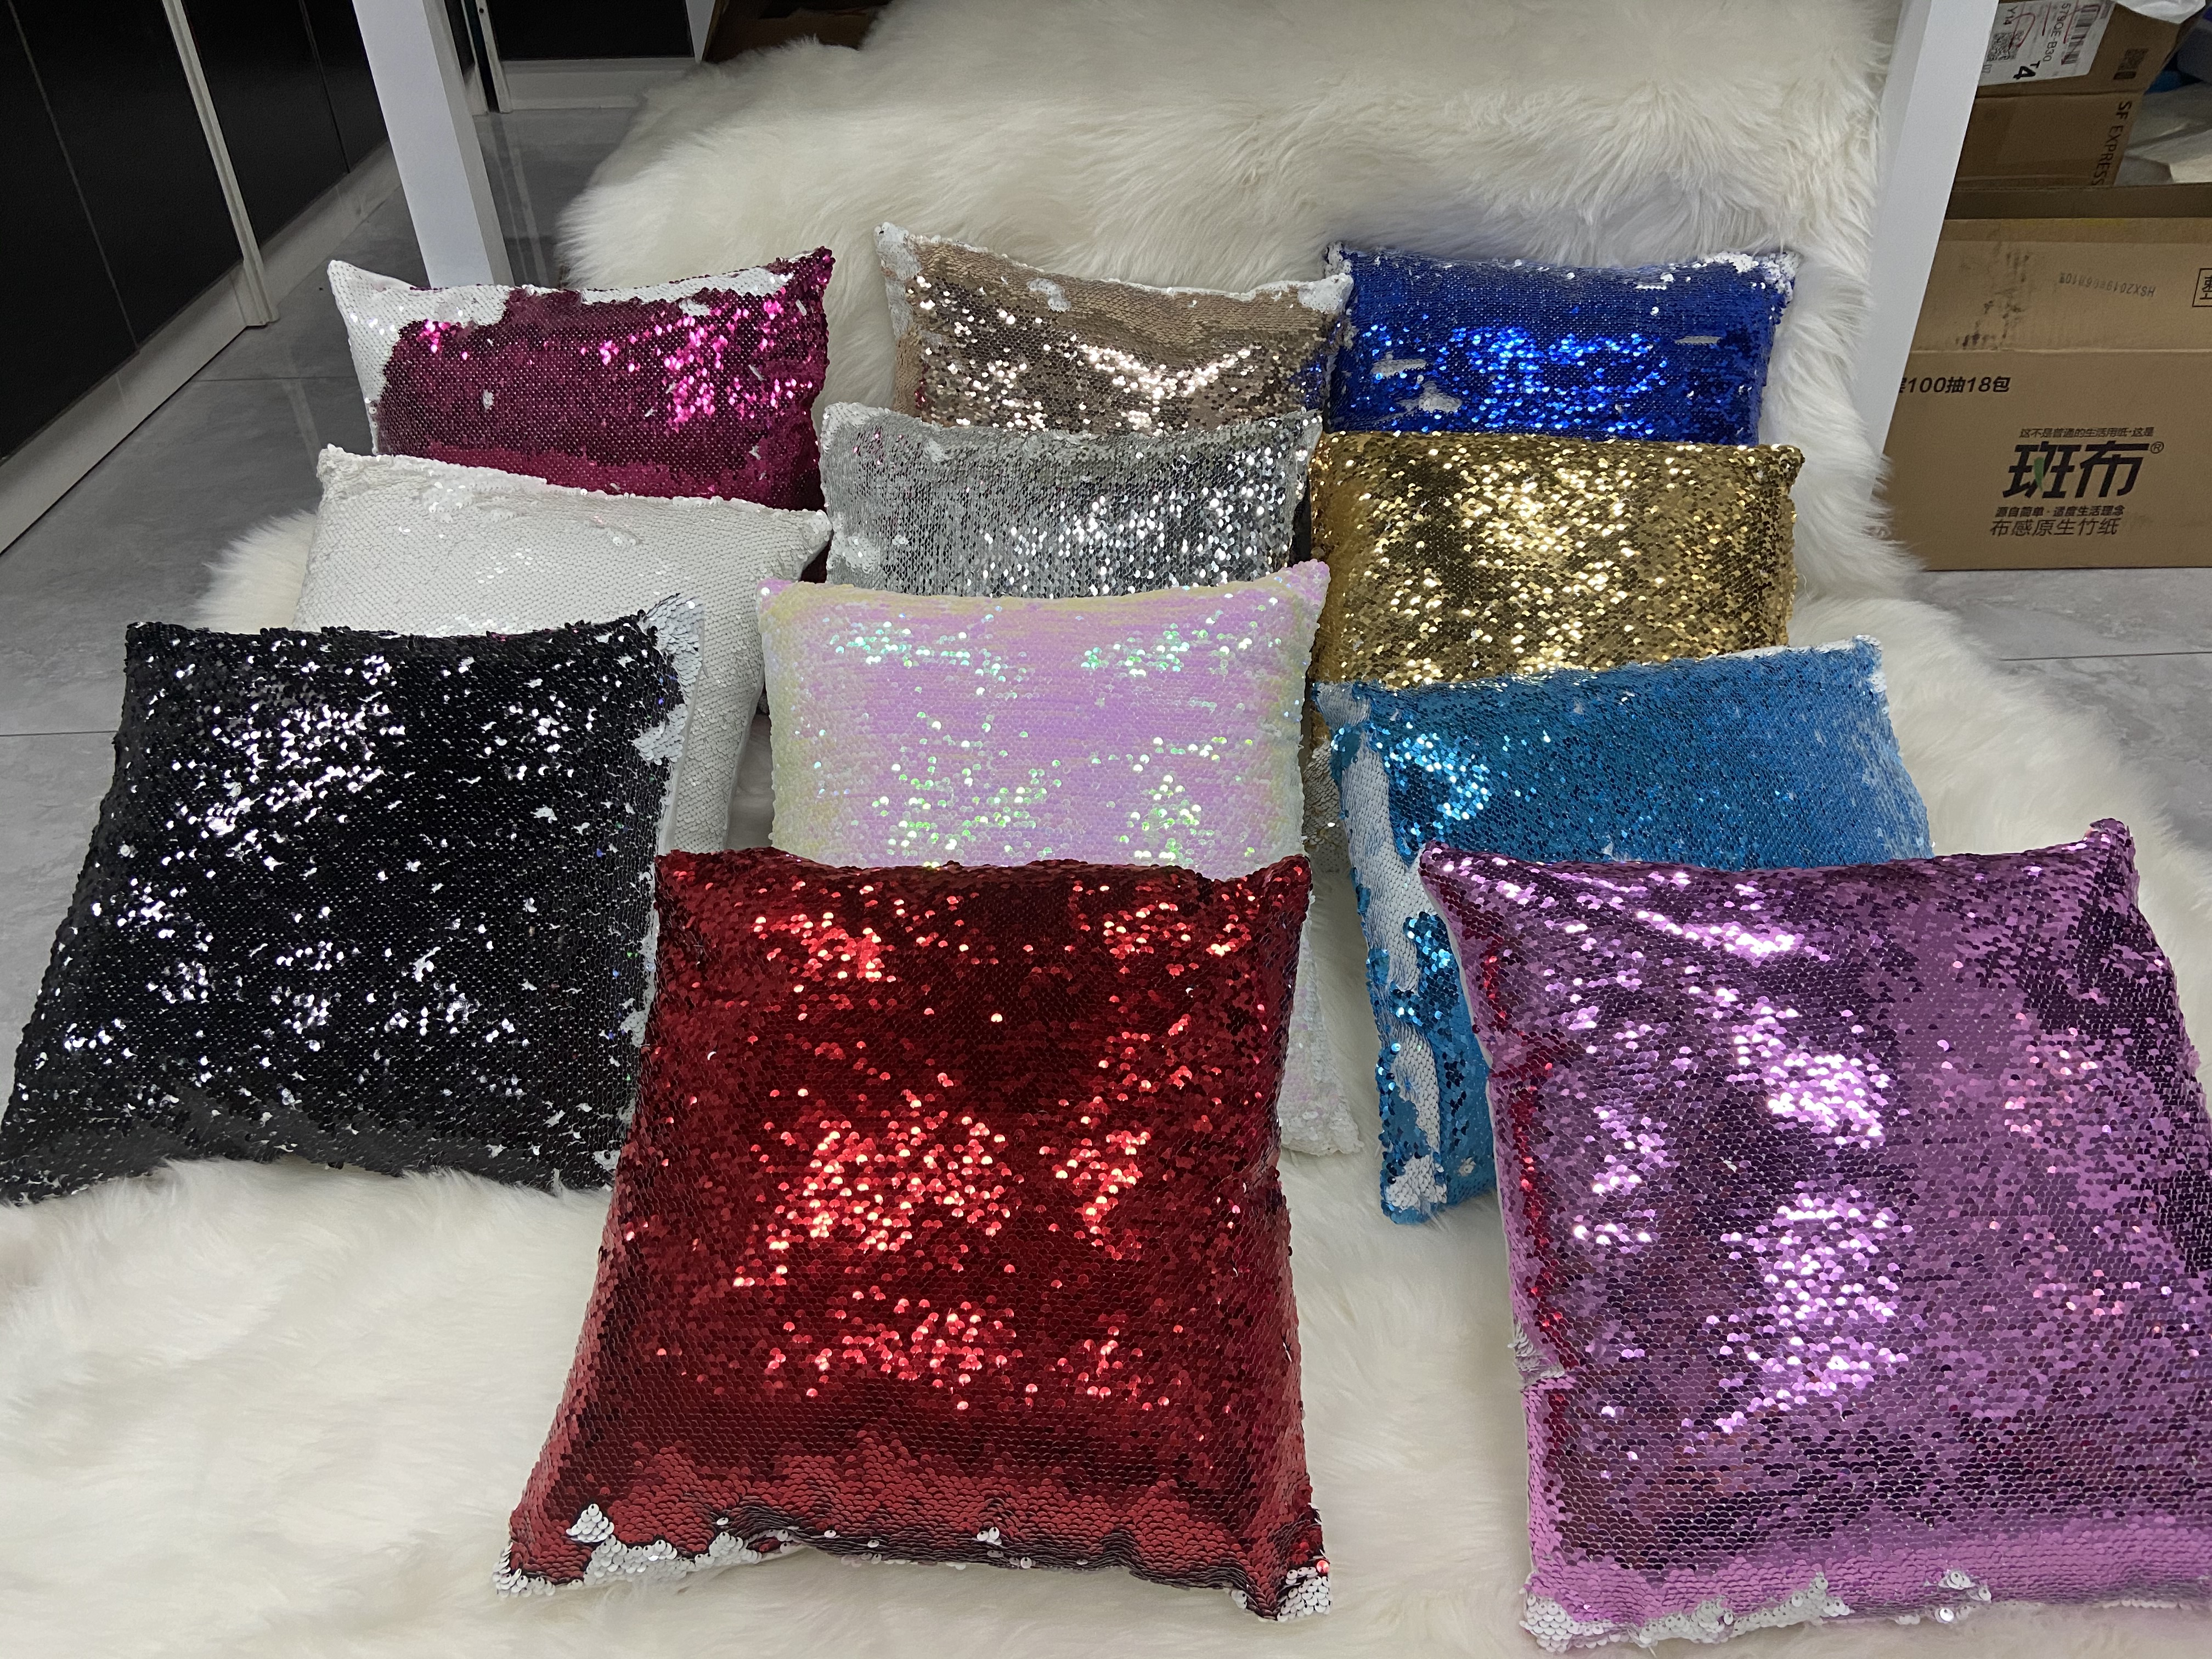 Free shippping 10pcs/Lot 16x16 inch New Arrival Sublimation Sequin Pillow Case For Hotel/Bed/Decoration от DHgate WW